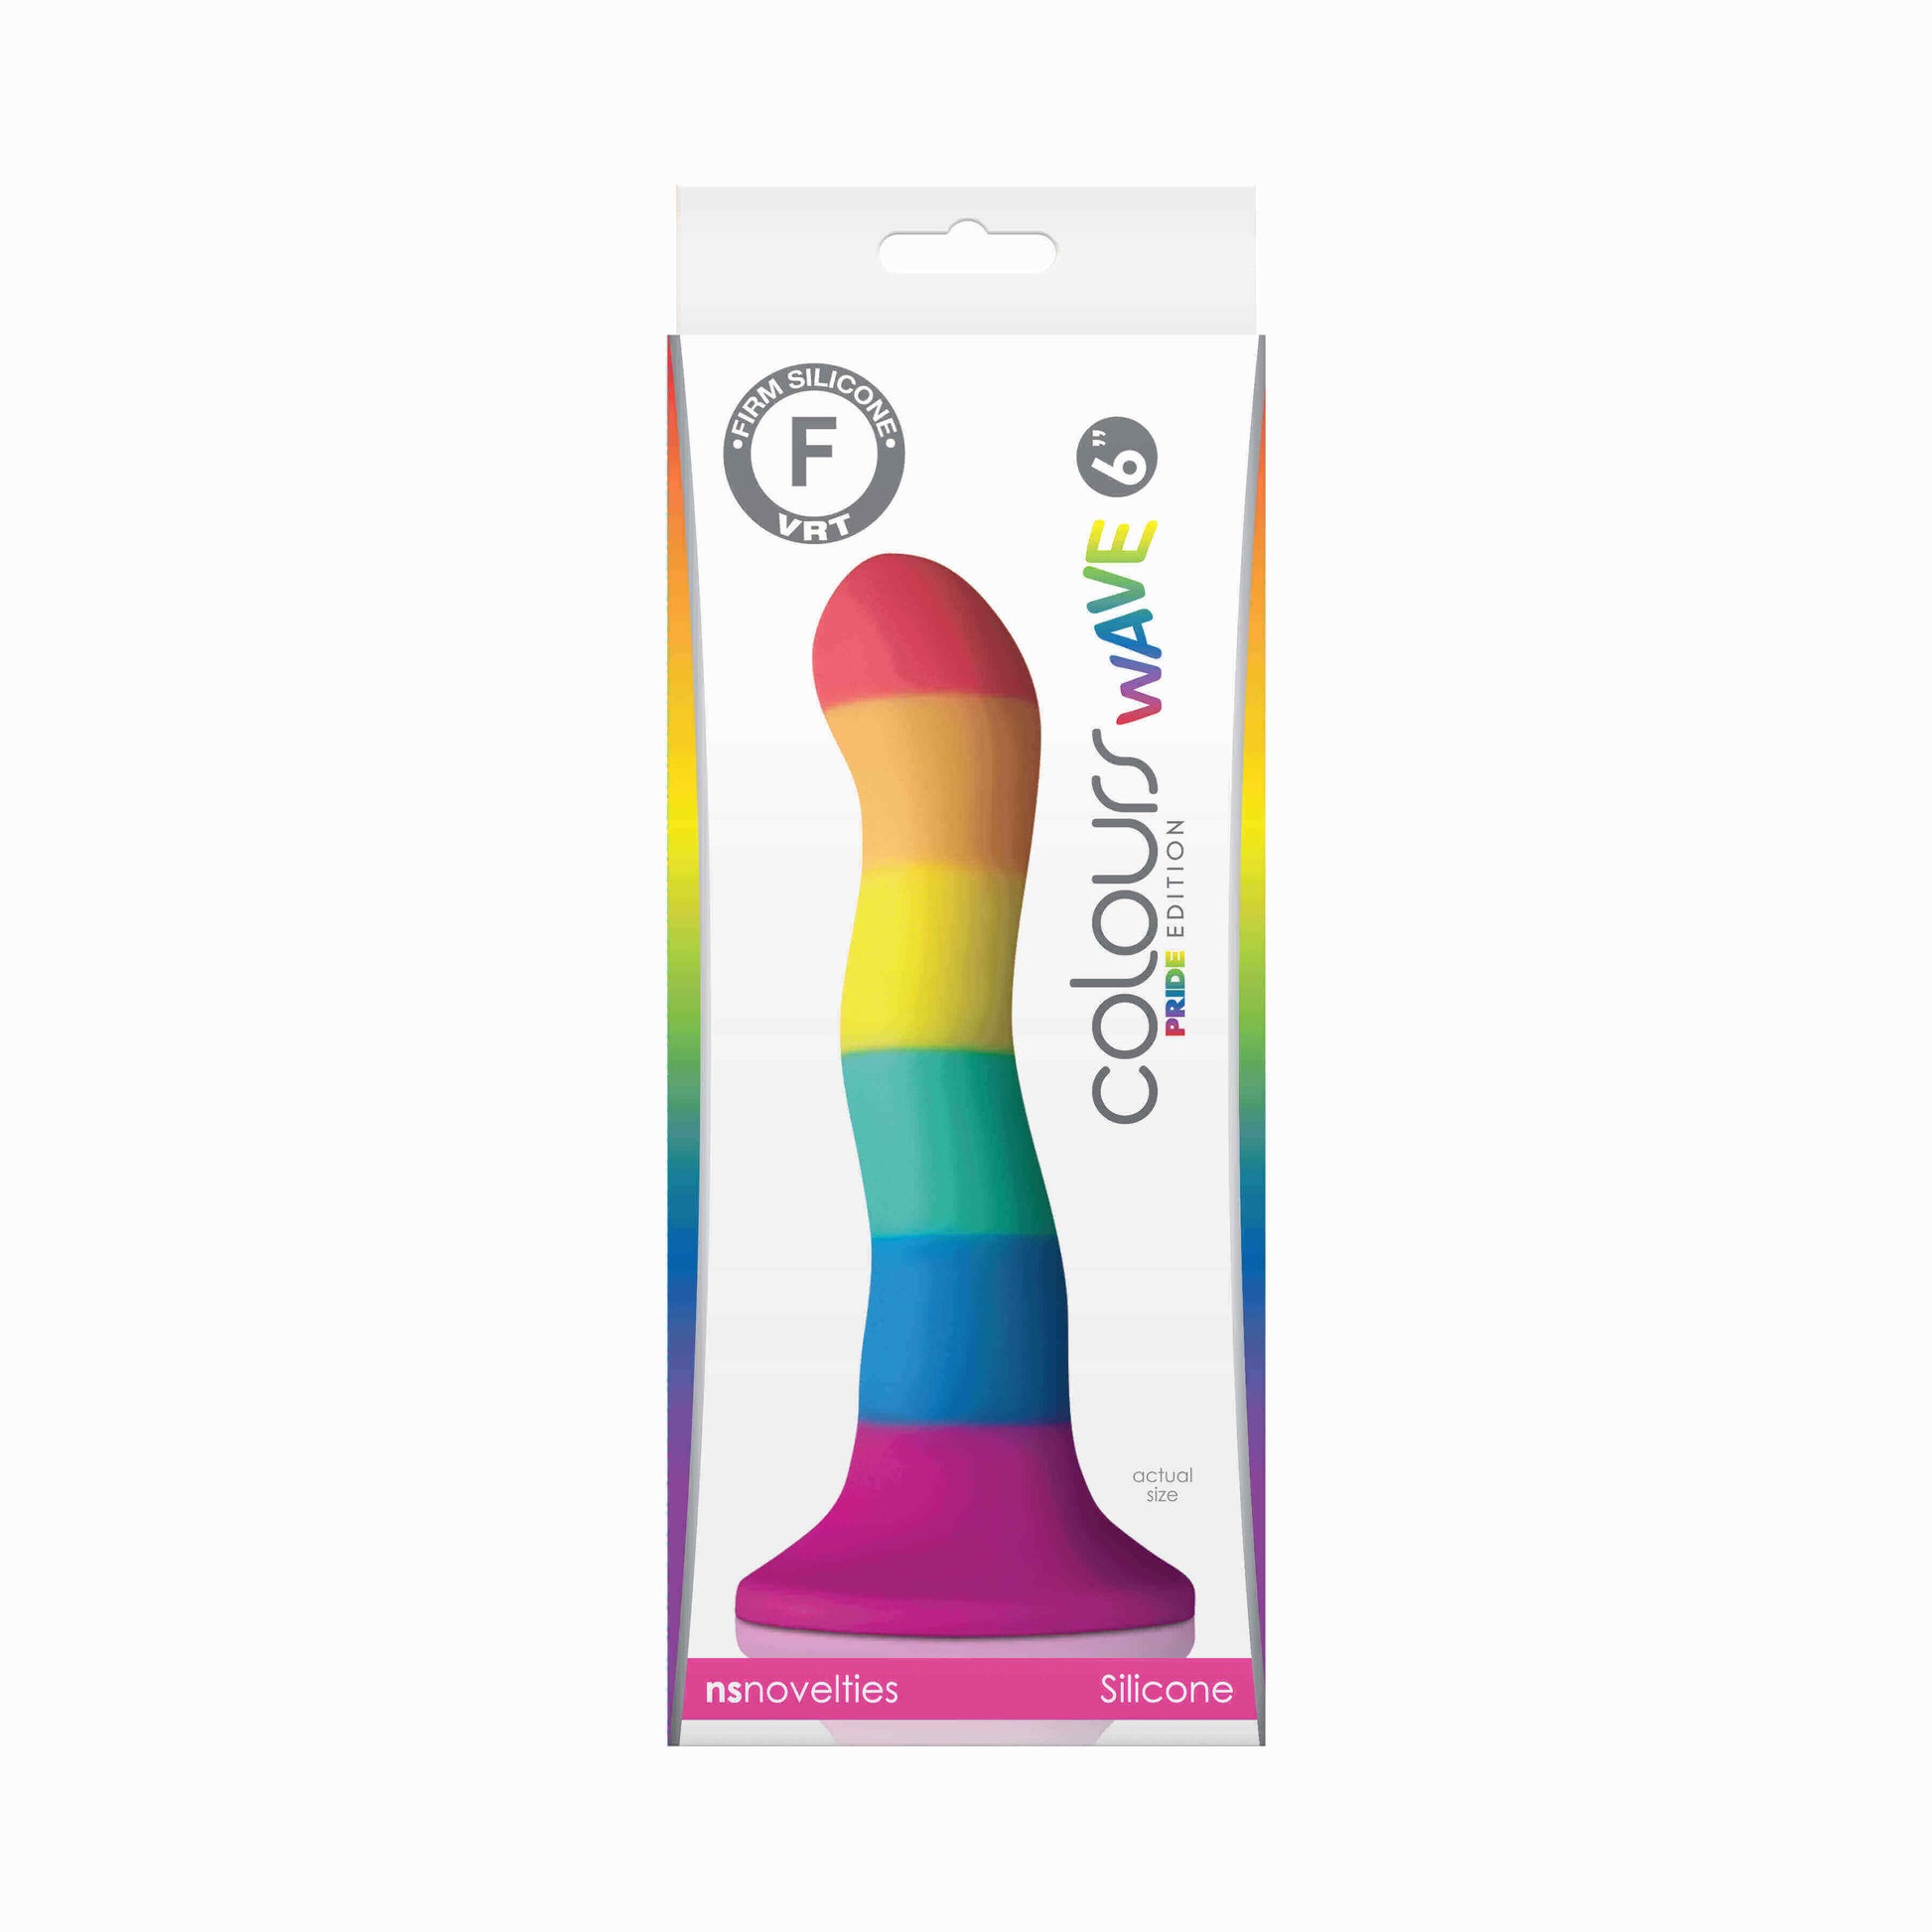 Package of the 6 Inch Rainbow Silicone Dildo - Colours Pride Edition - The Bigger O online sex toy shop USA, Canada & UK shipping available